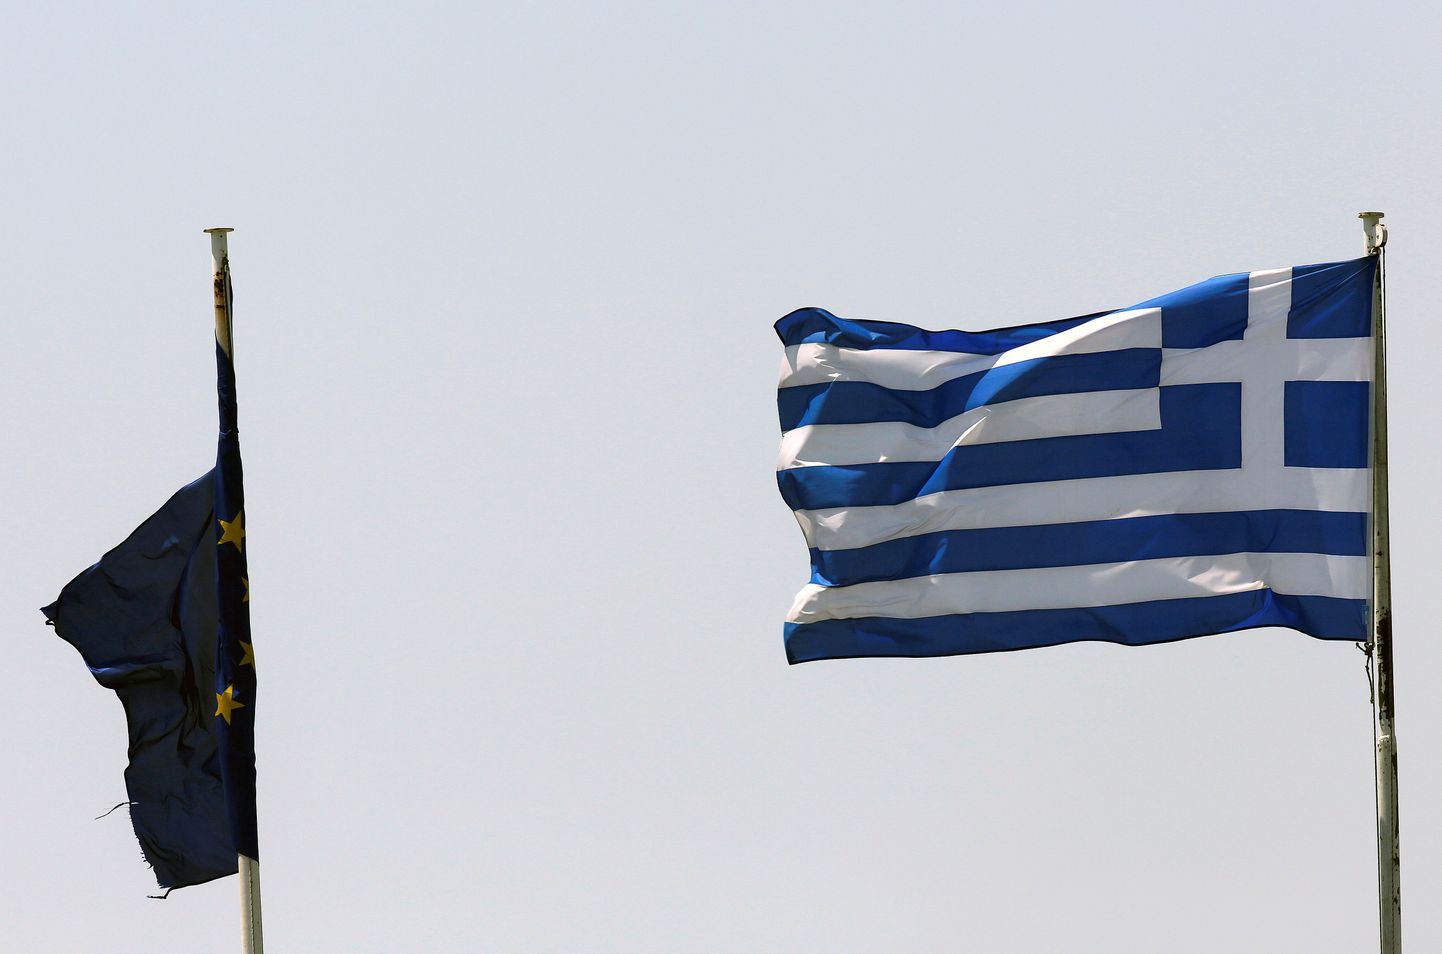 Kreeka ja Euroopa Liidu lipud. Pilt on illustratiivne.

A Greek and a tangled EU flag flutter atop Greece's Financial Ministry in Athens, Greece June 24, 2016 after Britain voted to leave the European Union in the Brexit referendum. REUTERS/Yannis Behrakis